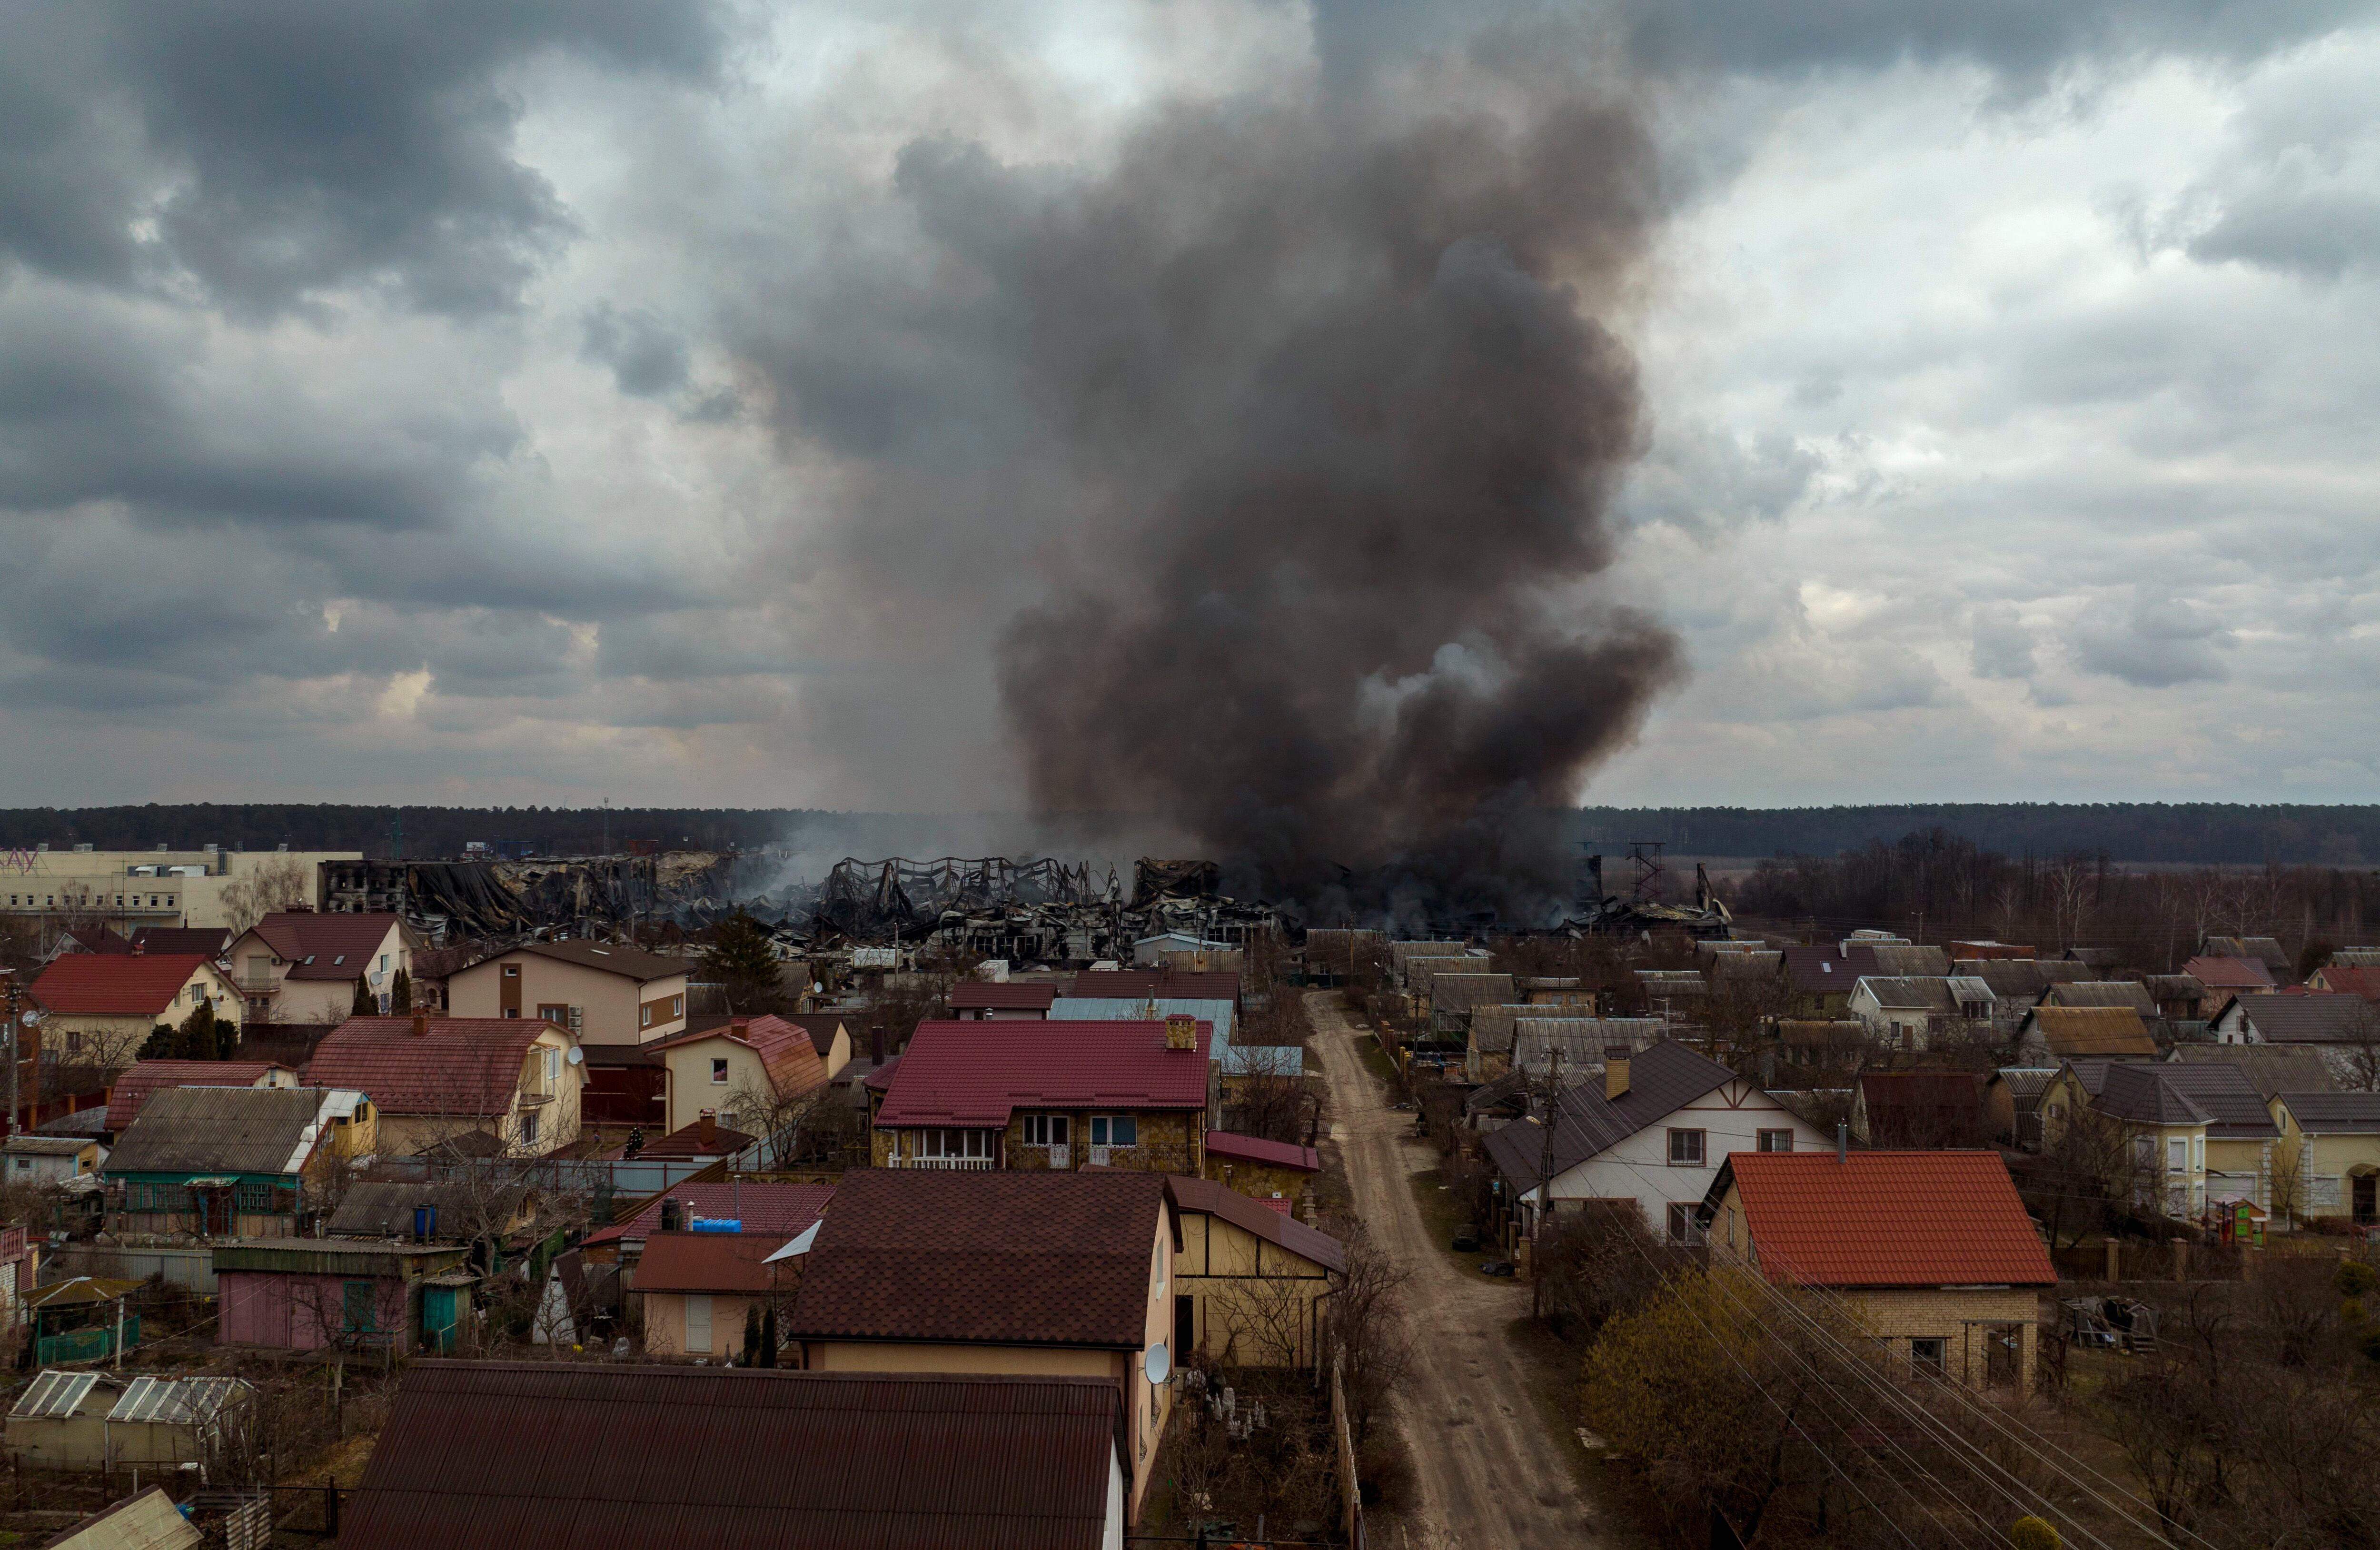 A factory and a store burn after being bombarded in Irpin, on the outskirts of Kyiv, Ukraine, Sunday, March 6, 2022. (Emilio Morenatti/AP)